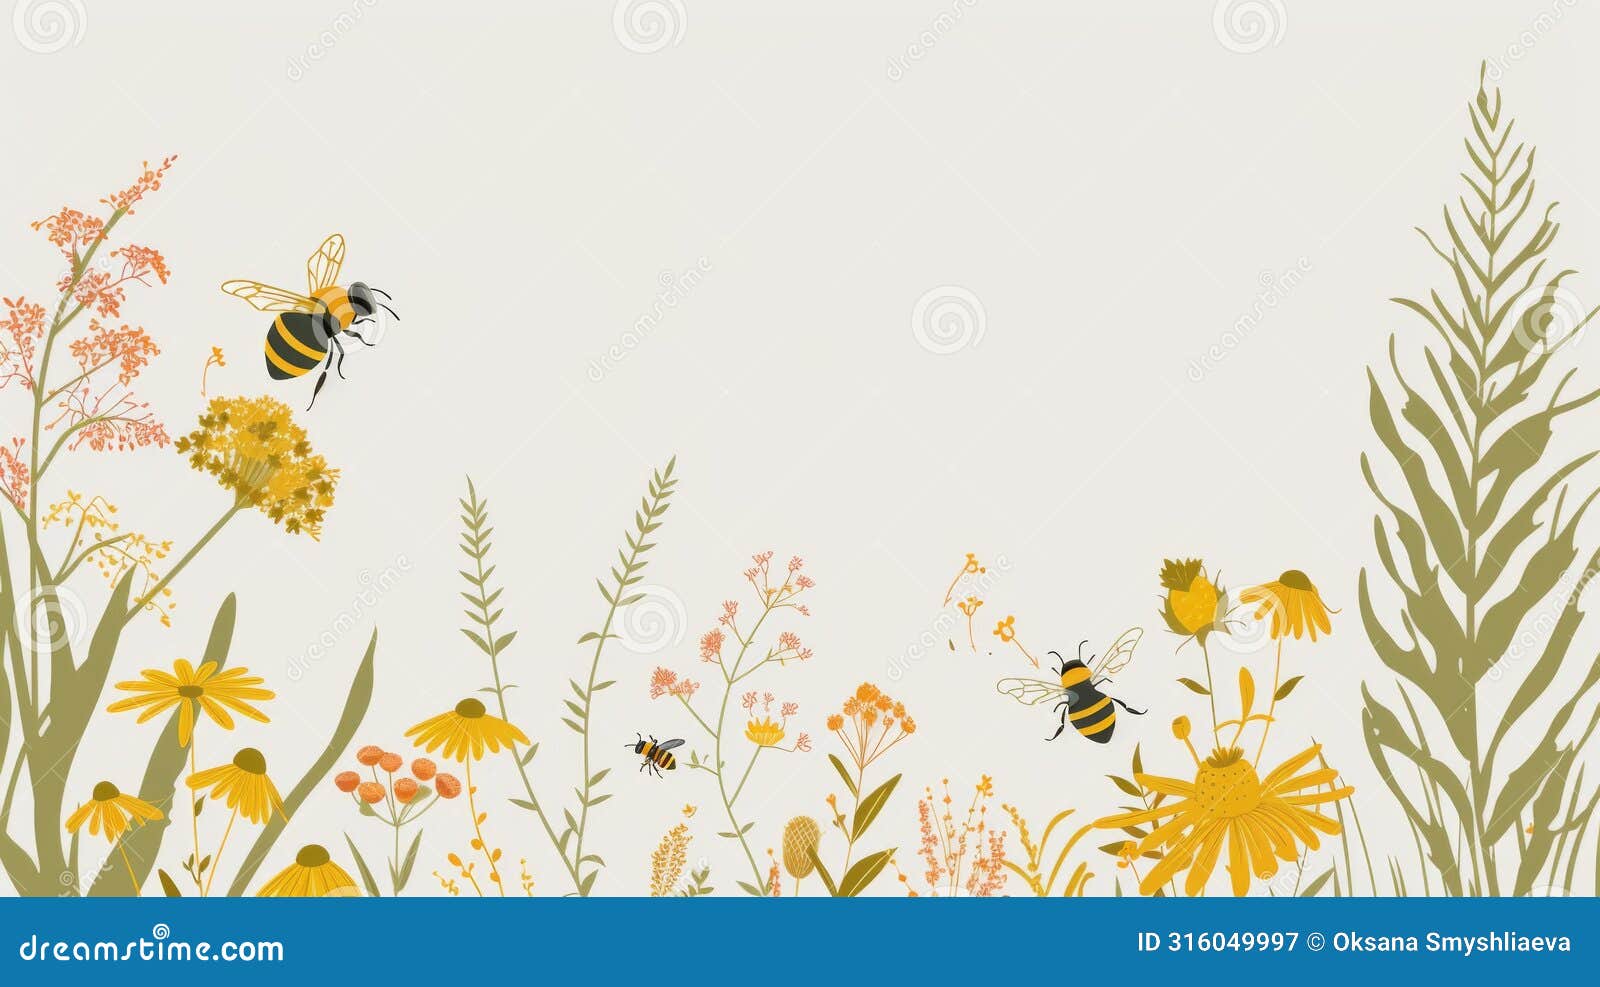 stylized  of bees hovering among wildflowers, depicting the diversity of pollinators and their habitats with